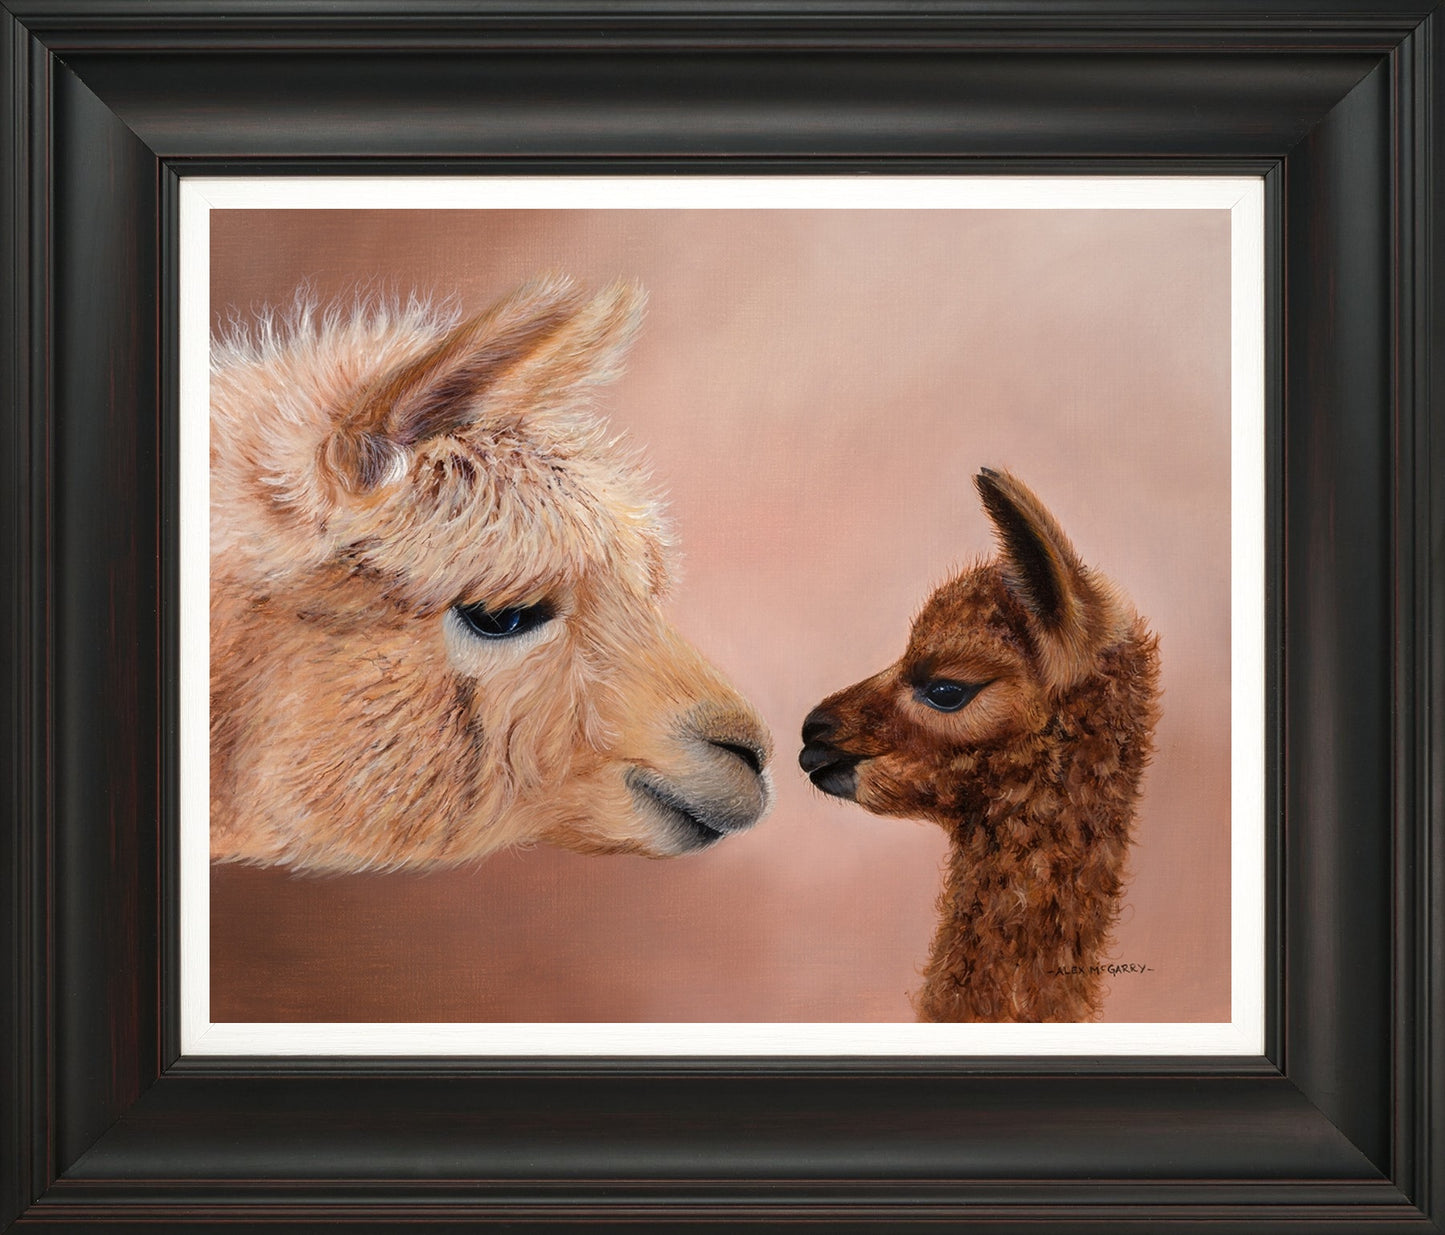 Hello Mum limited edition print by Alex McGarry